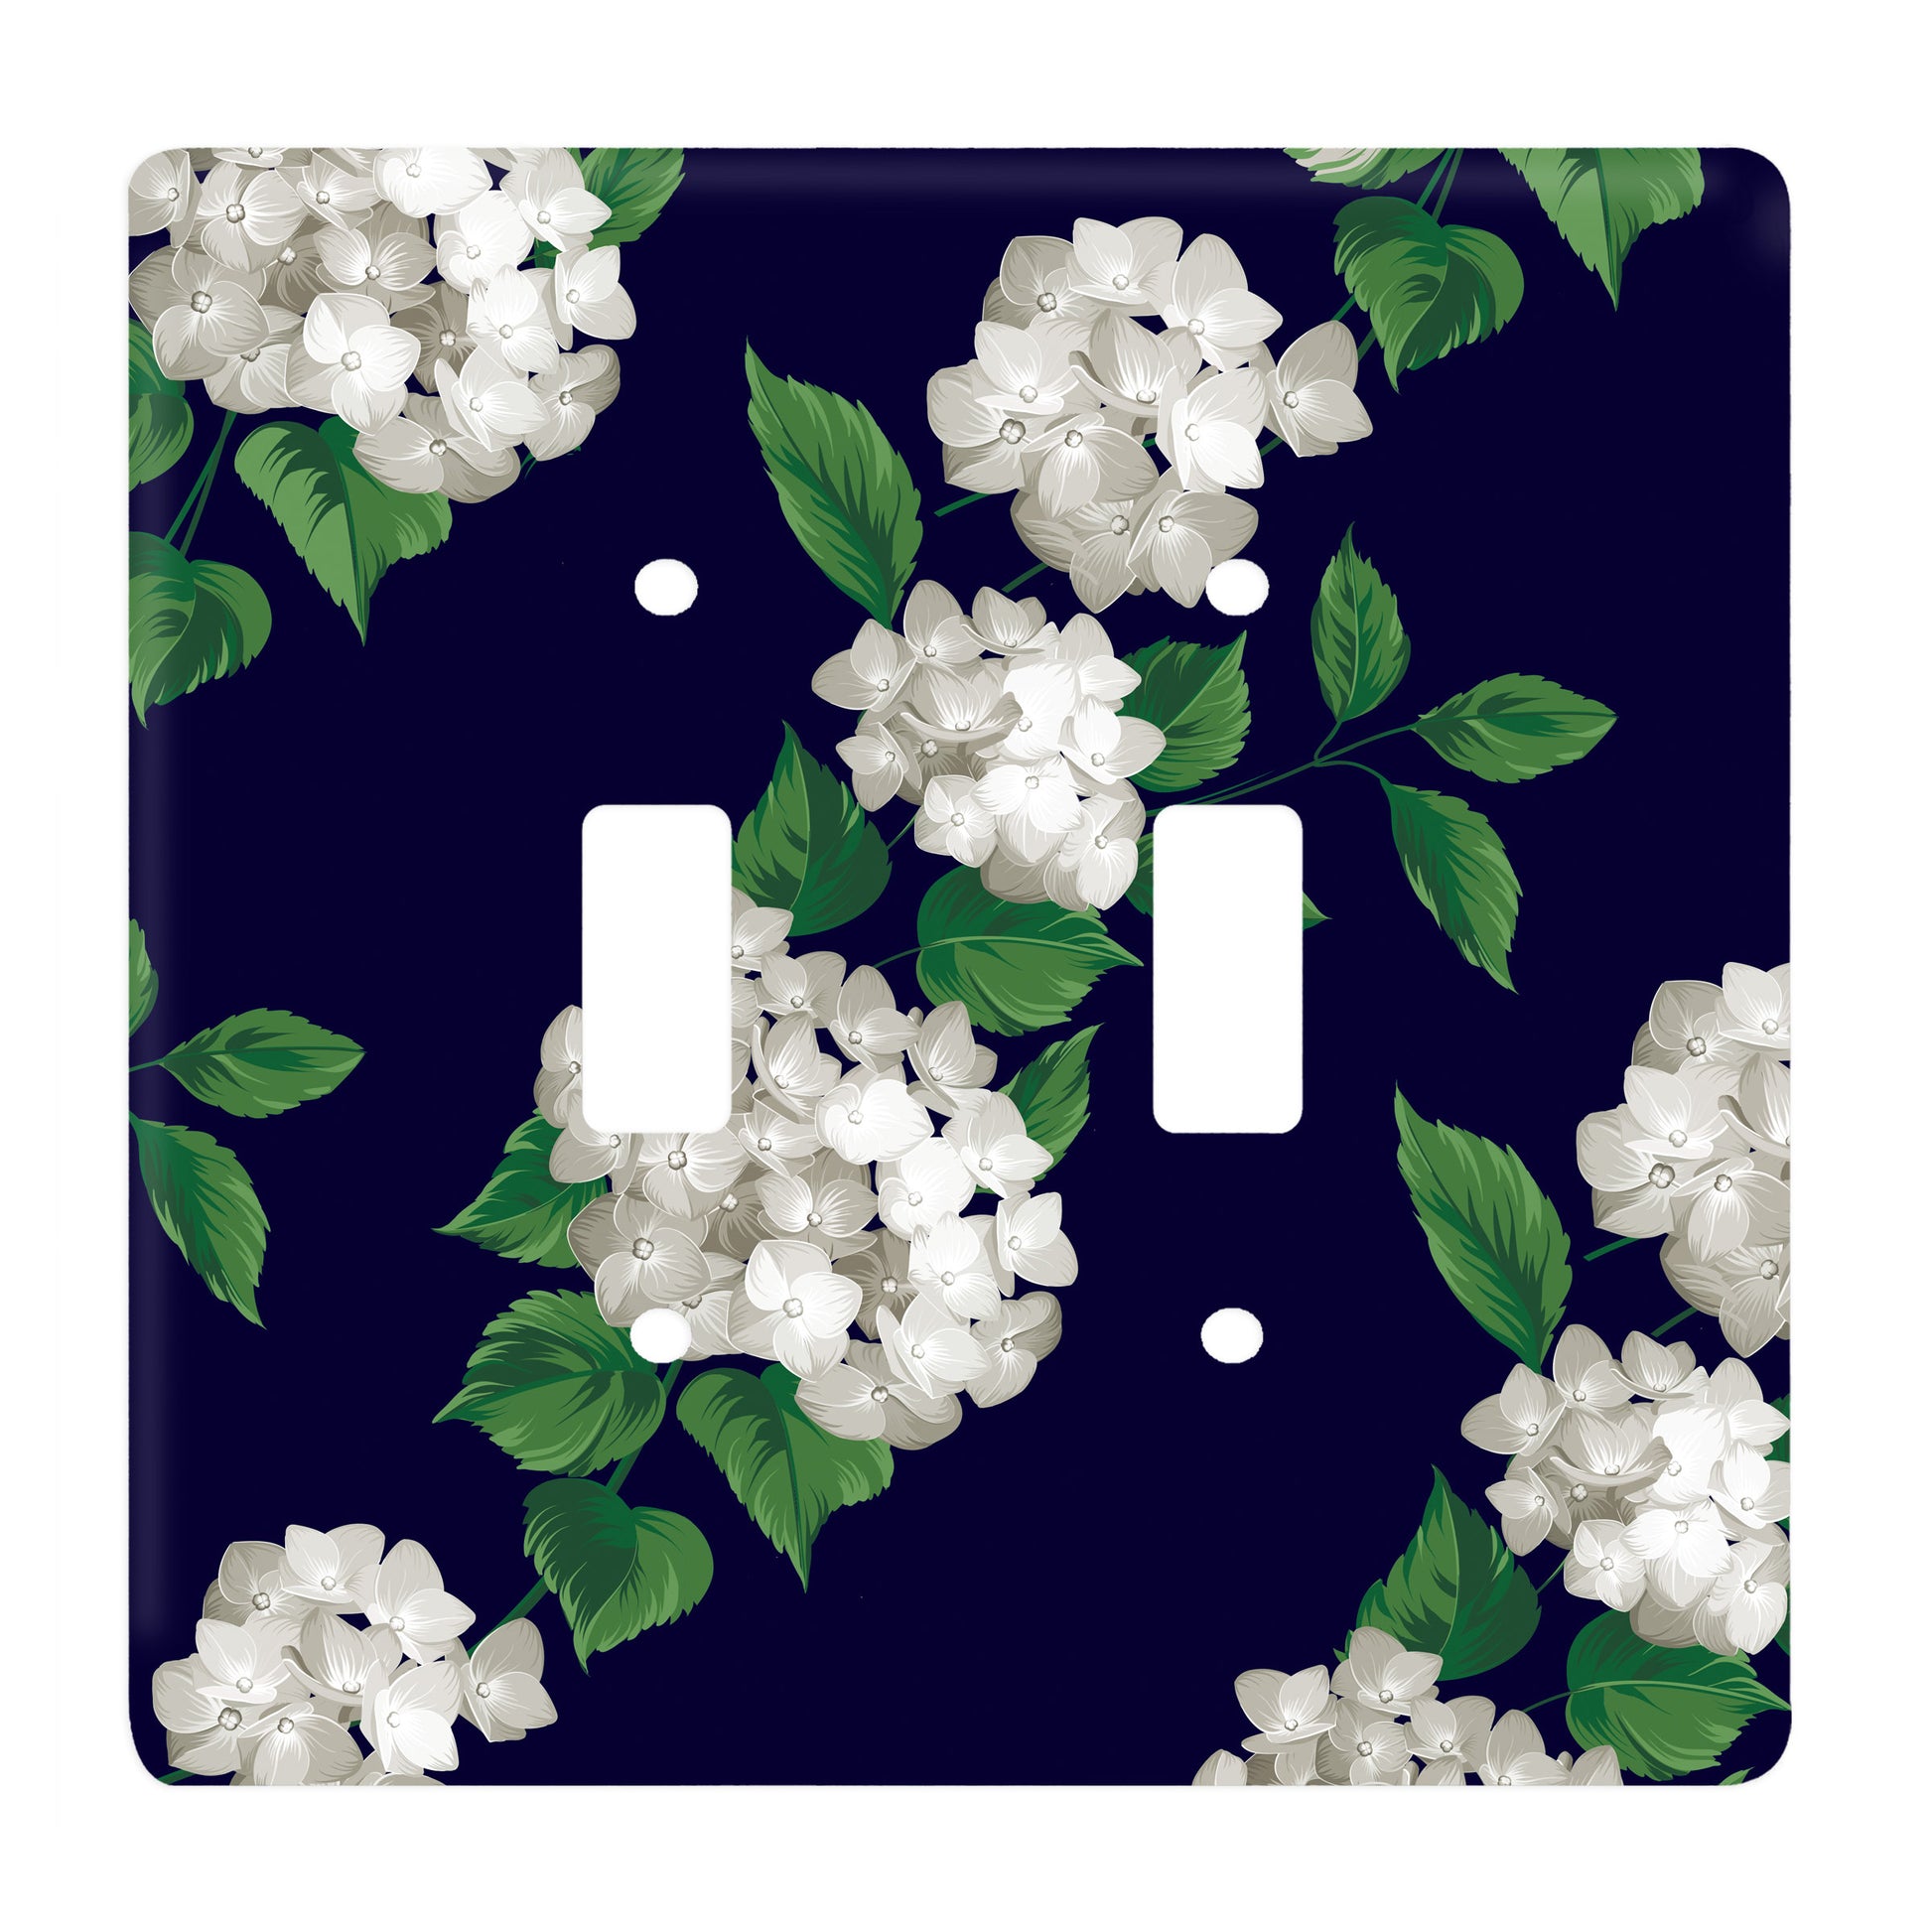 blue ceramic double toggle switch plate featuring white hydrangeas.